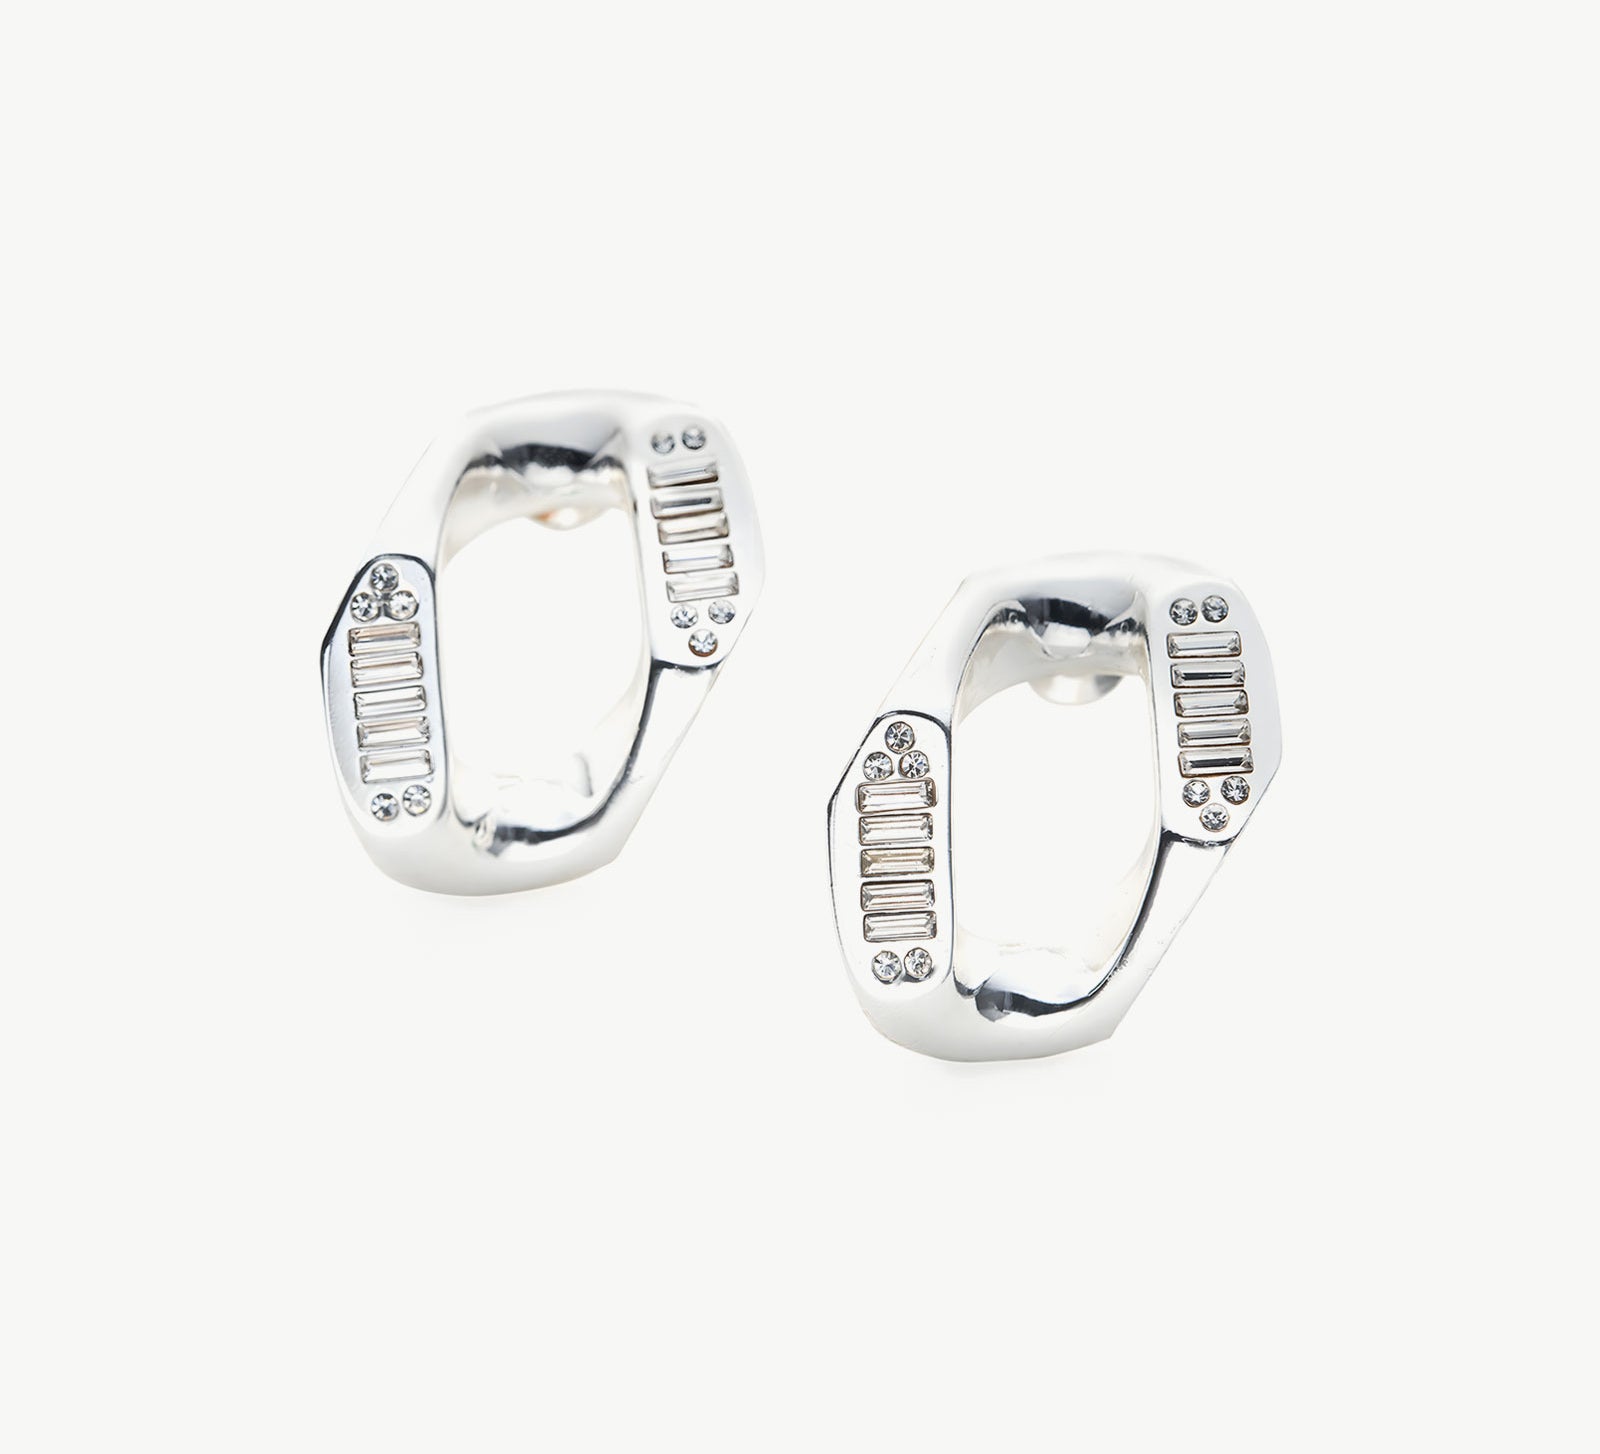 Contemporary Silver Charm: Crystal-adorned Wavy Stud Earrings in silver, a contemporary and stylish choice that complements your look with understated elegance